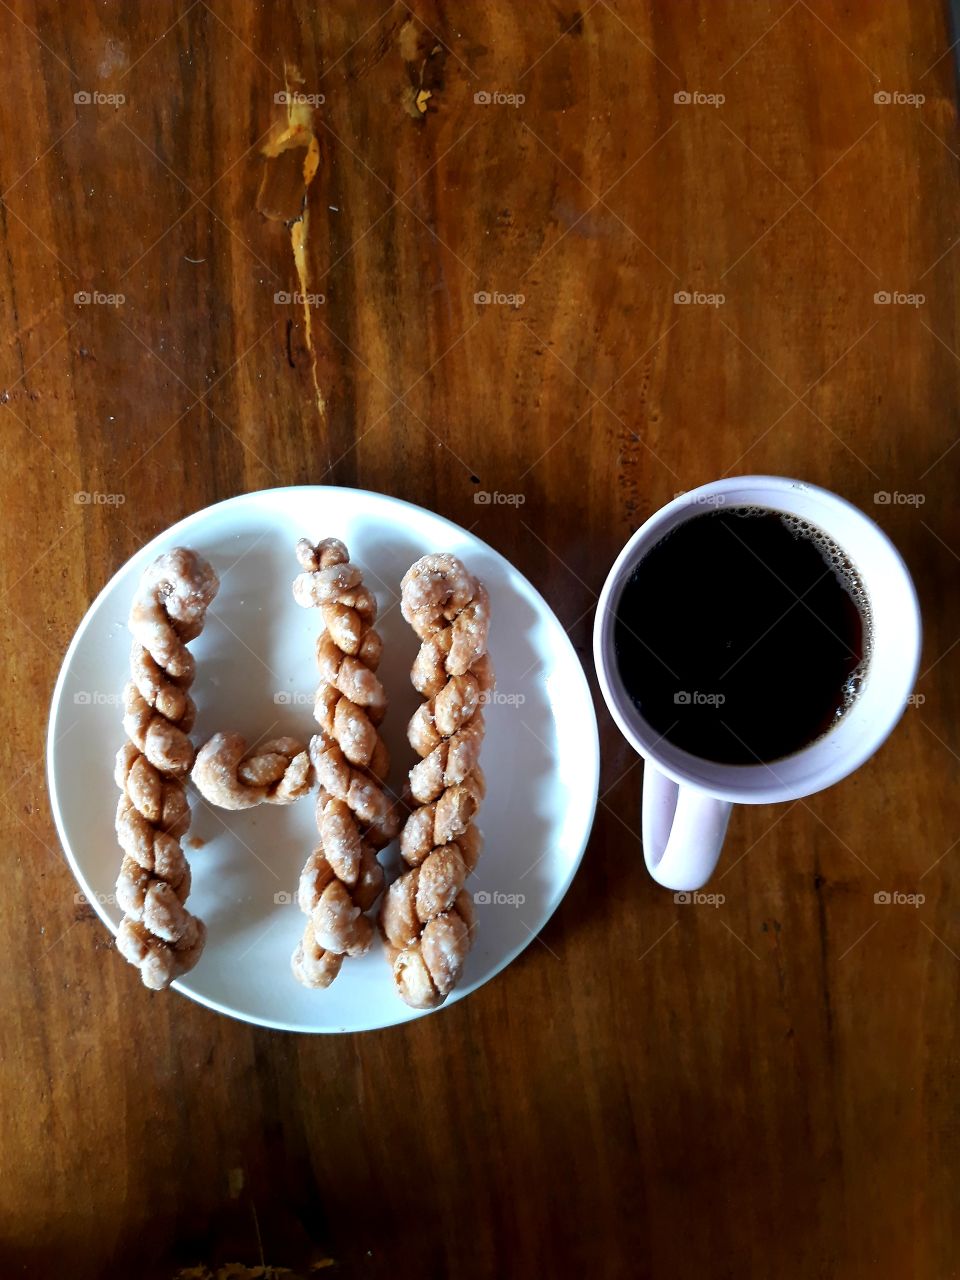 One of life's simple pleasures, coming home to twisted glazed breadsticks plus espresso!